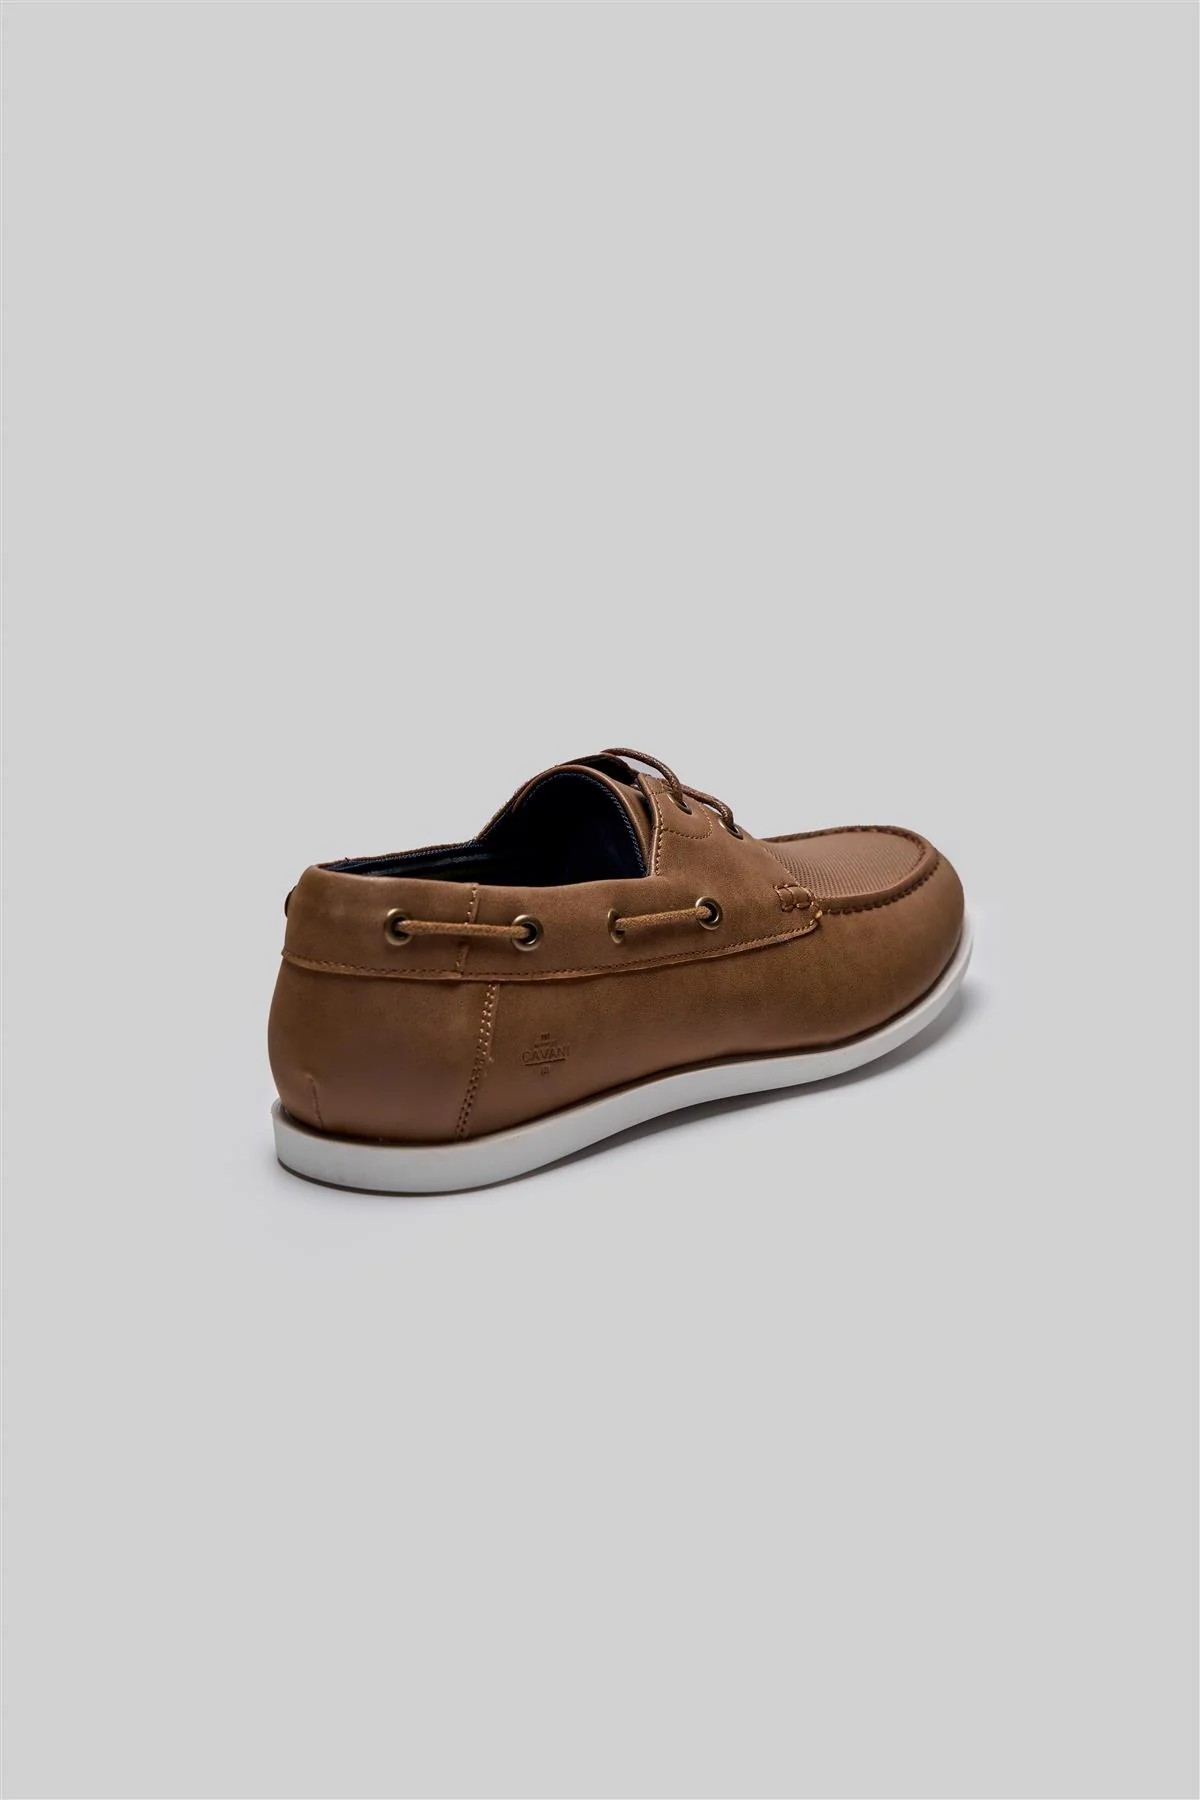 Men’s Leather Boat Shoes with White Sole - ANDROS